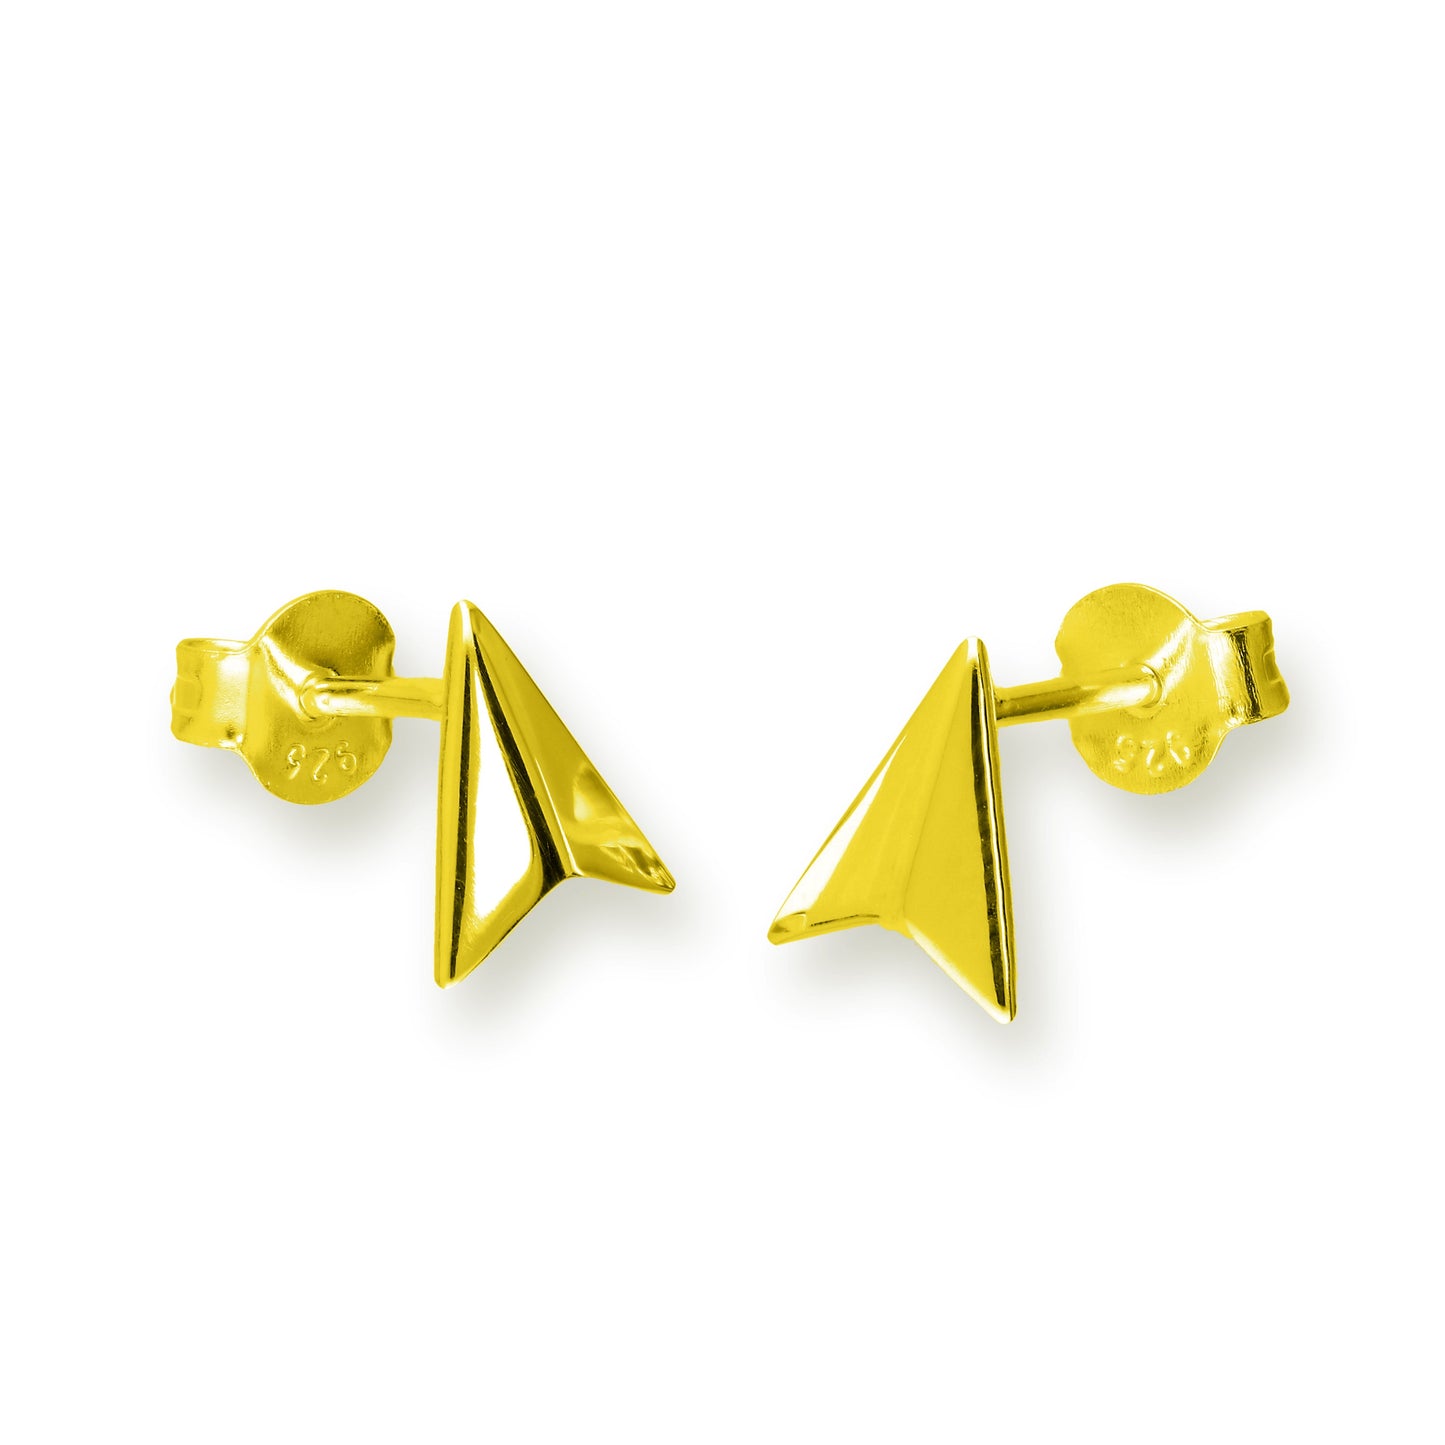 Gold Plated Sterling Silver Paper Plane Stud Earrings